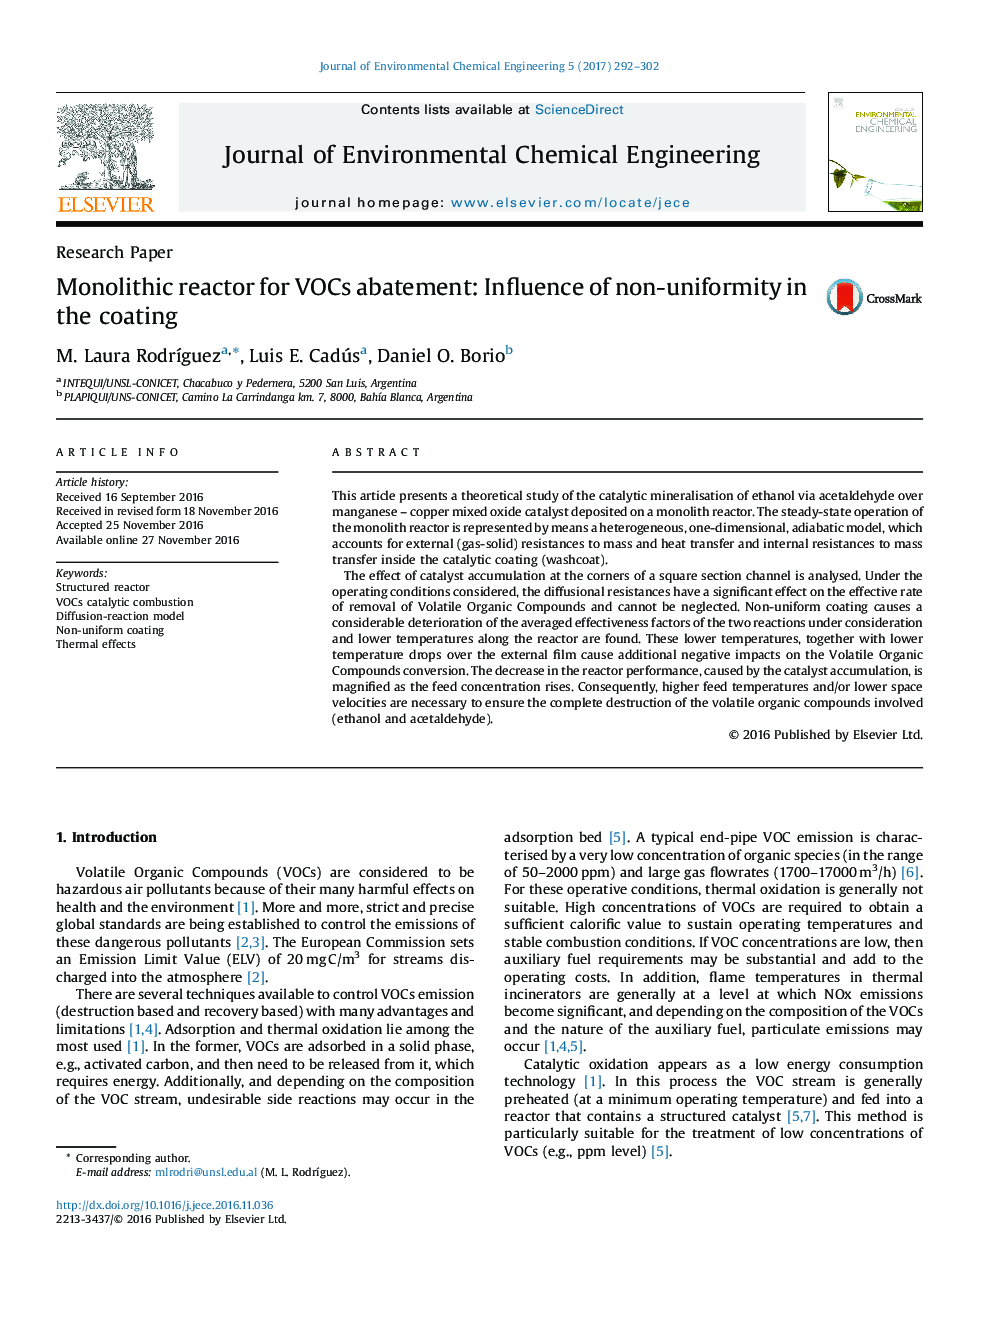 Monolithic reactor for VOCs abatement: Influence of non-uniformity in the coating